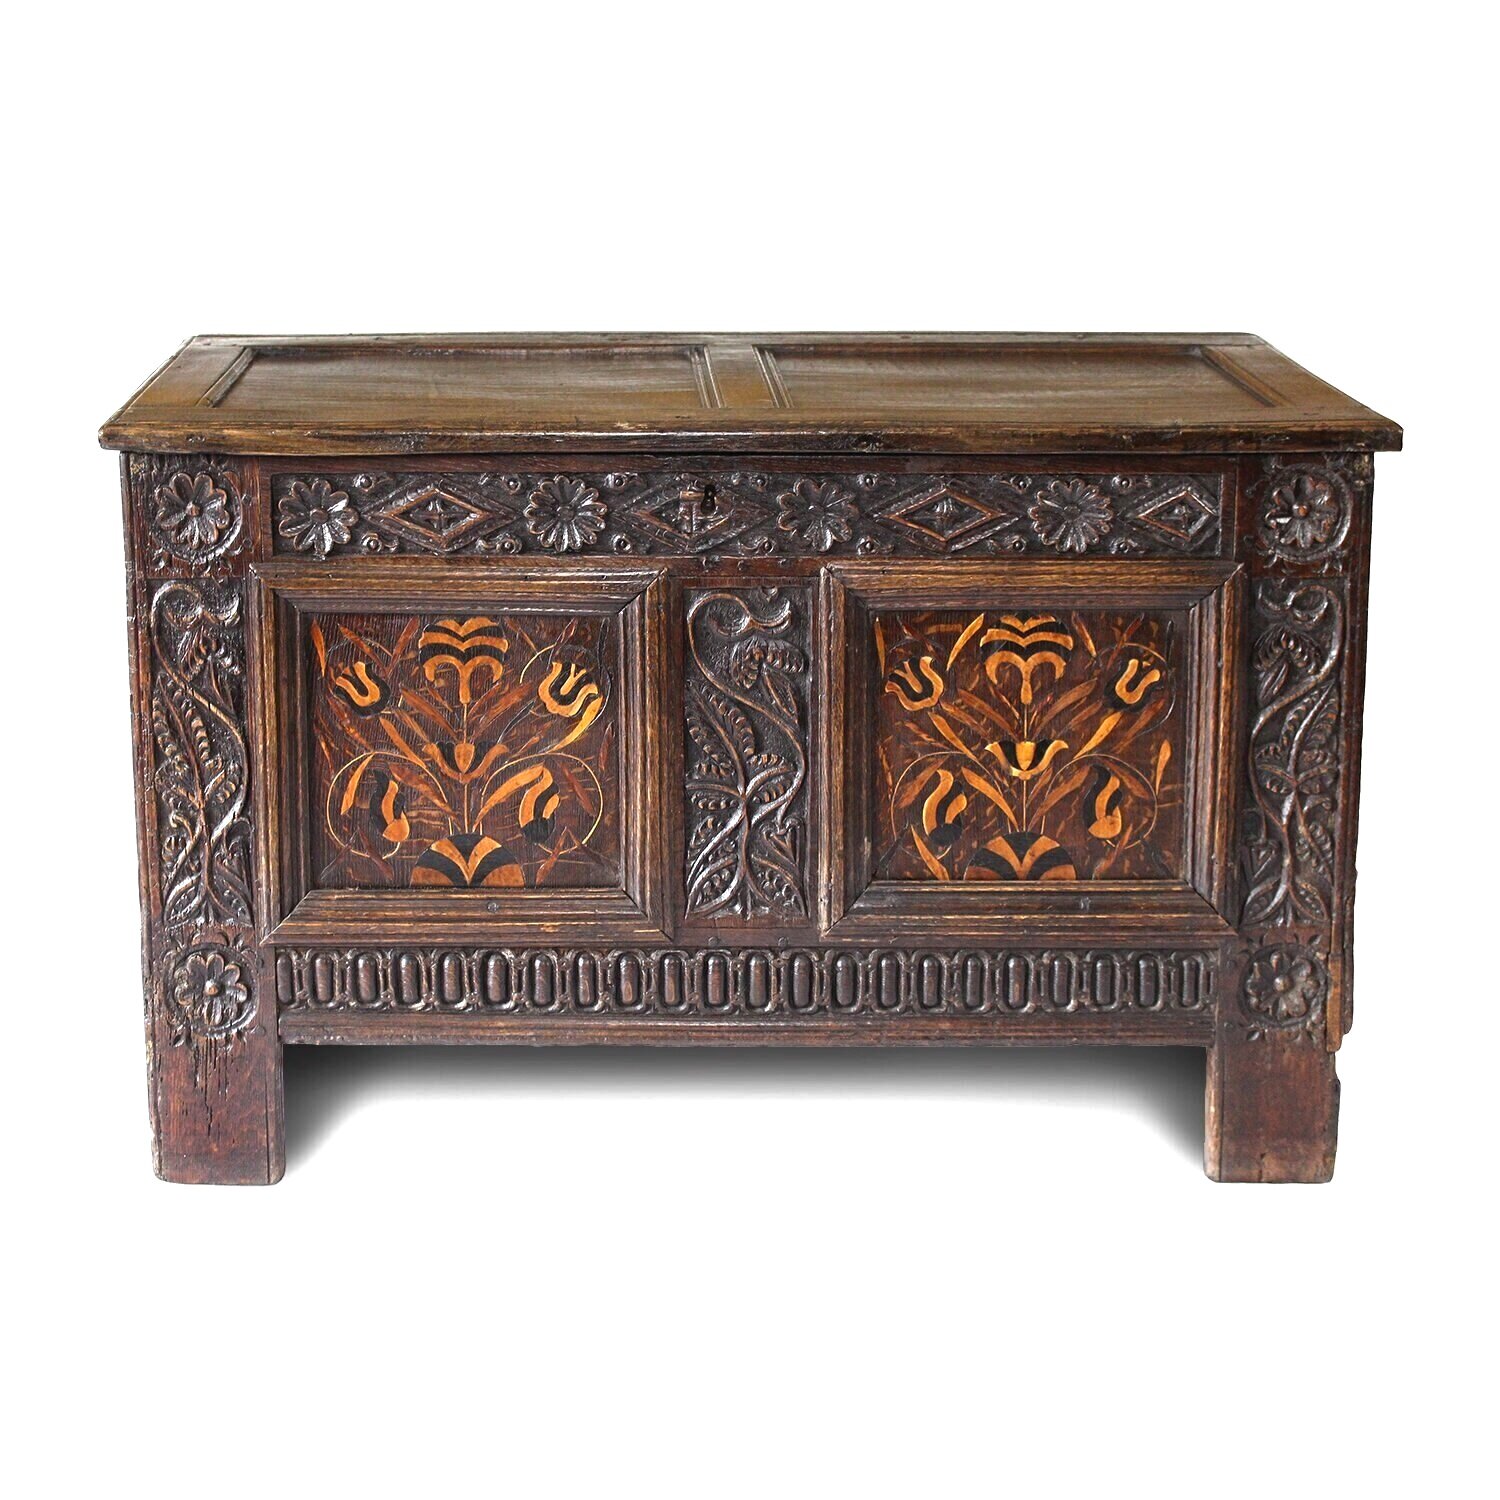 English Oak Lidded Coffer with Original Tulip Inlay and Carving, 17th Century